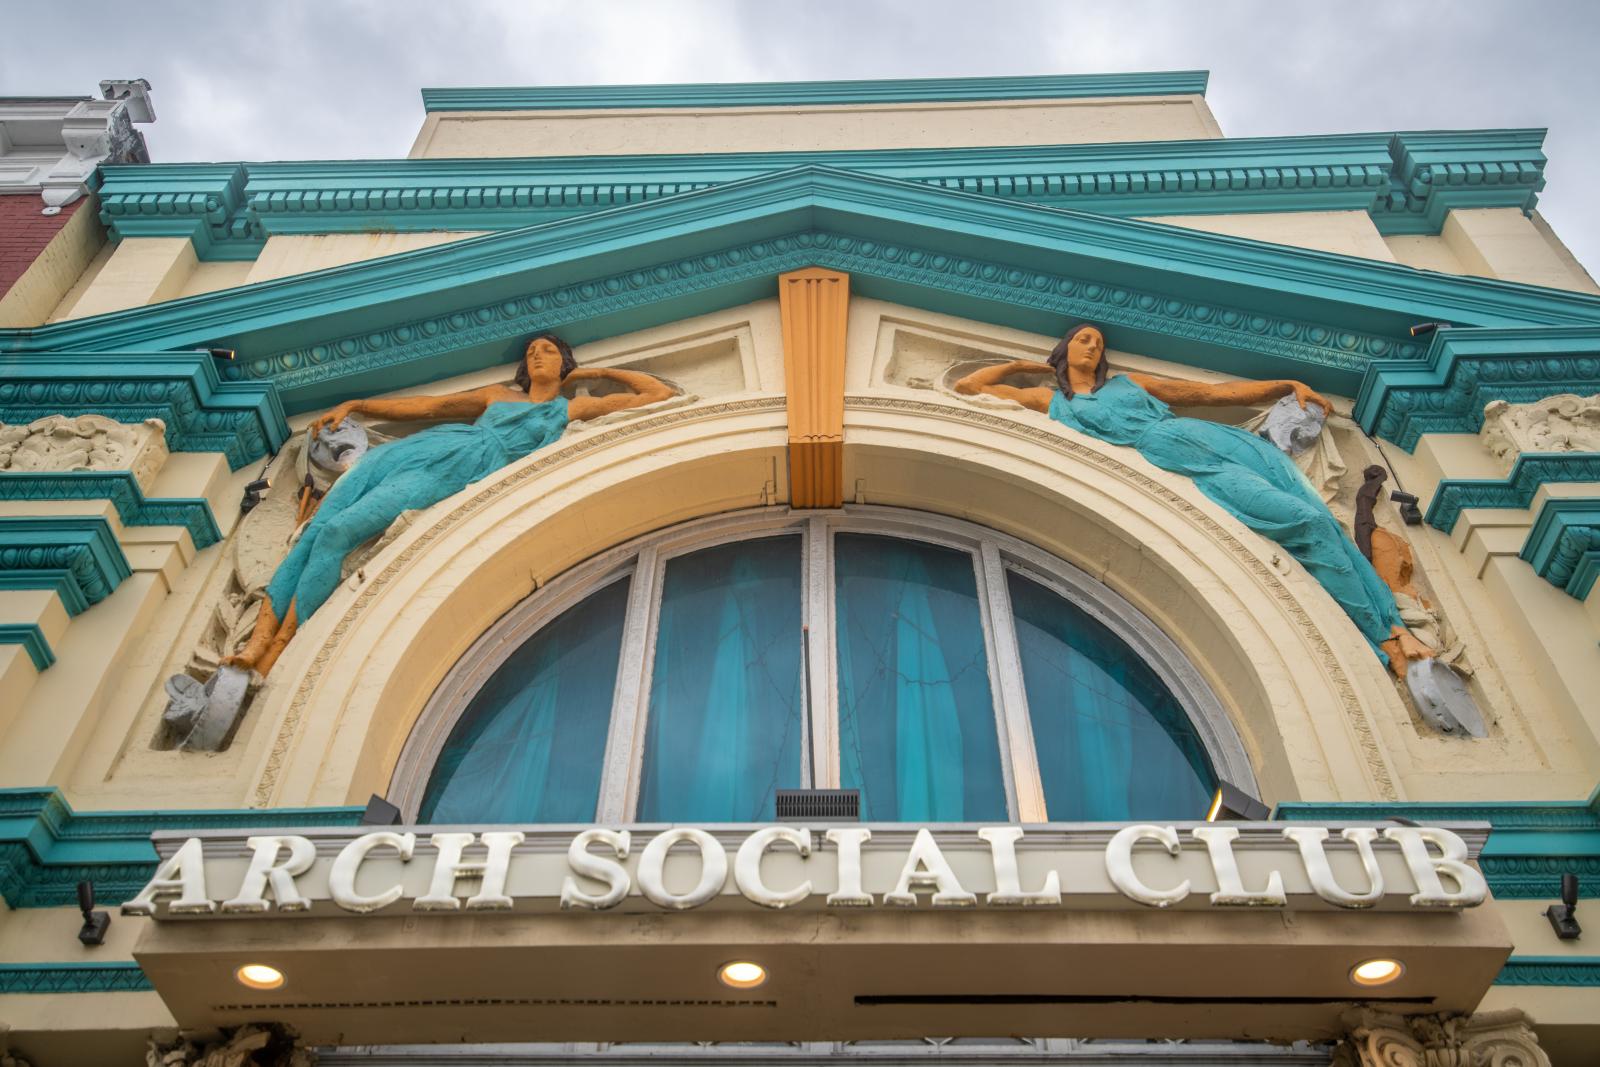 The Arch Social Club is an anchor organization of the Black Arts & Entertainment District running along Pennsylvania Avenue in Baltimore City. Photo by Edwin Remsberg Photographs.